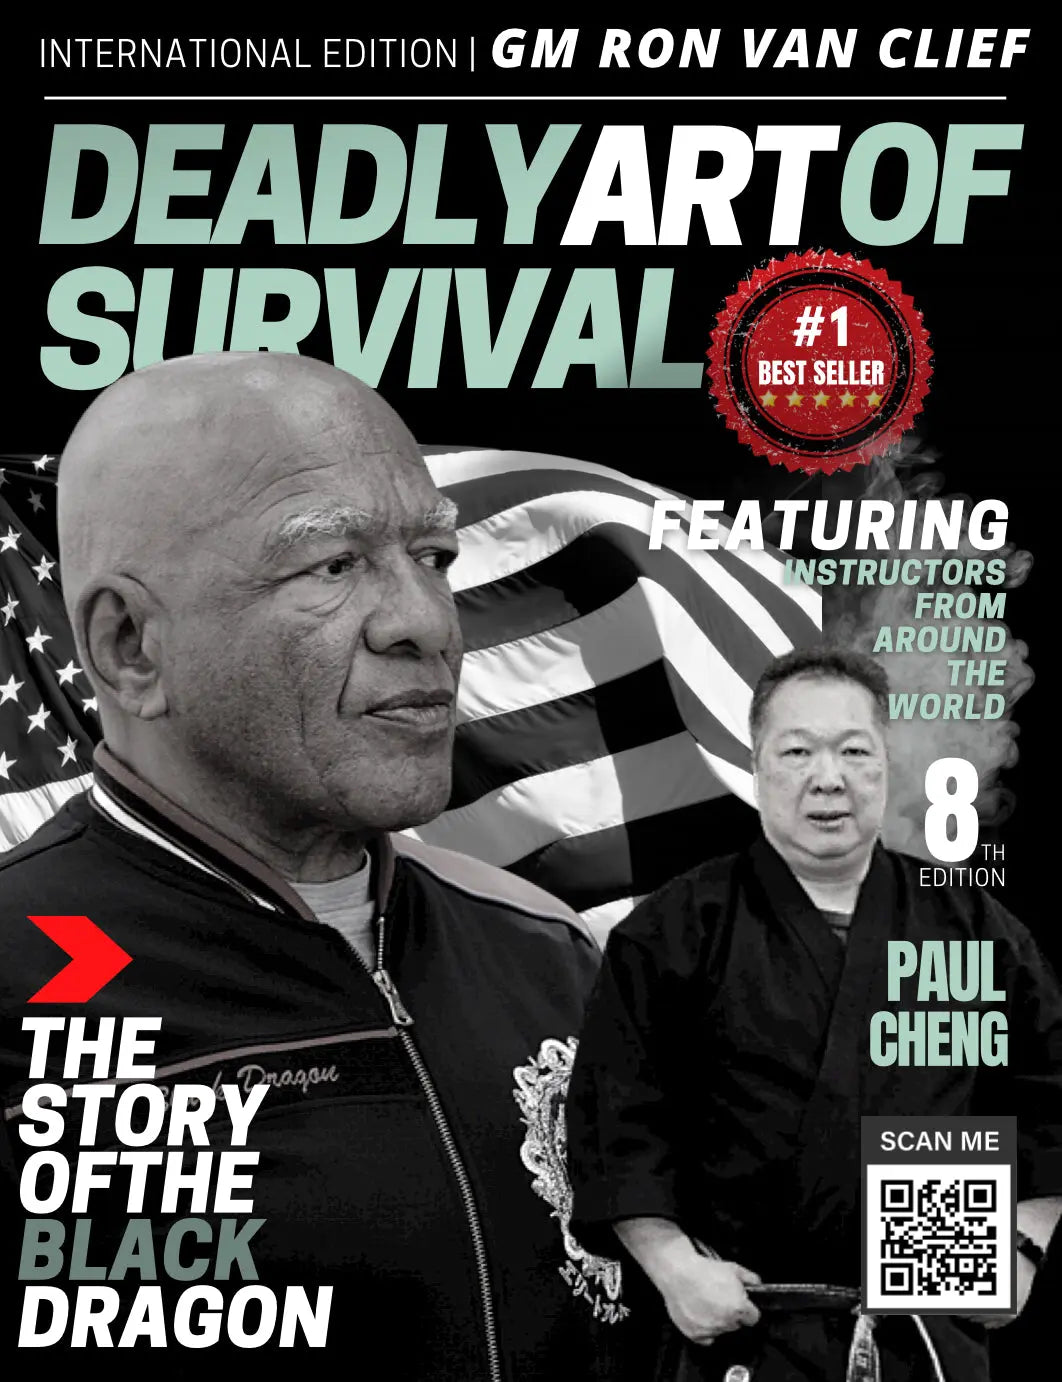 (Free Sample) Deadly Art of Survival Magazine 8th Edition: Featuring Ron Van Clief & Paul Cheng The #1 Martial Arts Magazine Worldwide deadlyartofsurvival.com